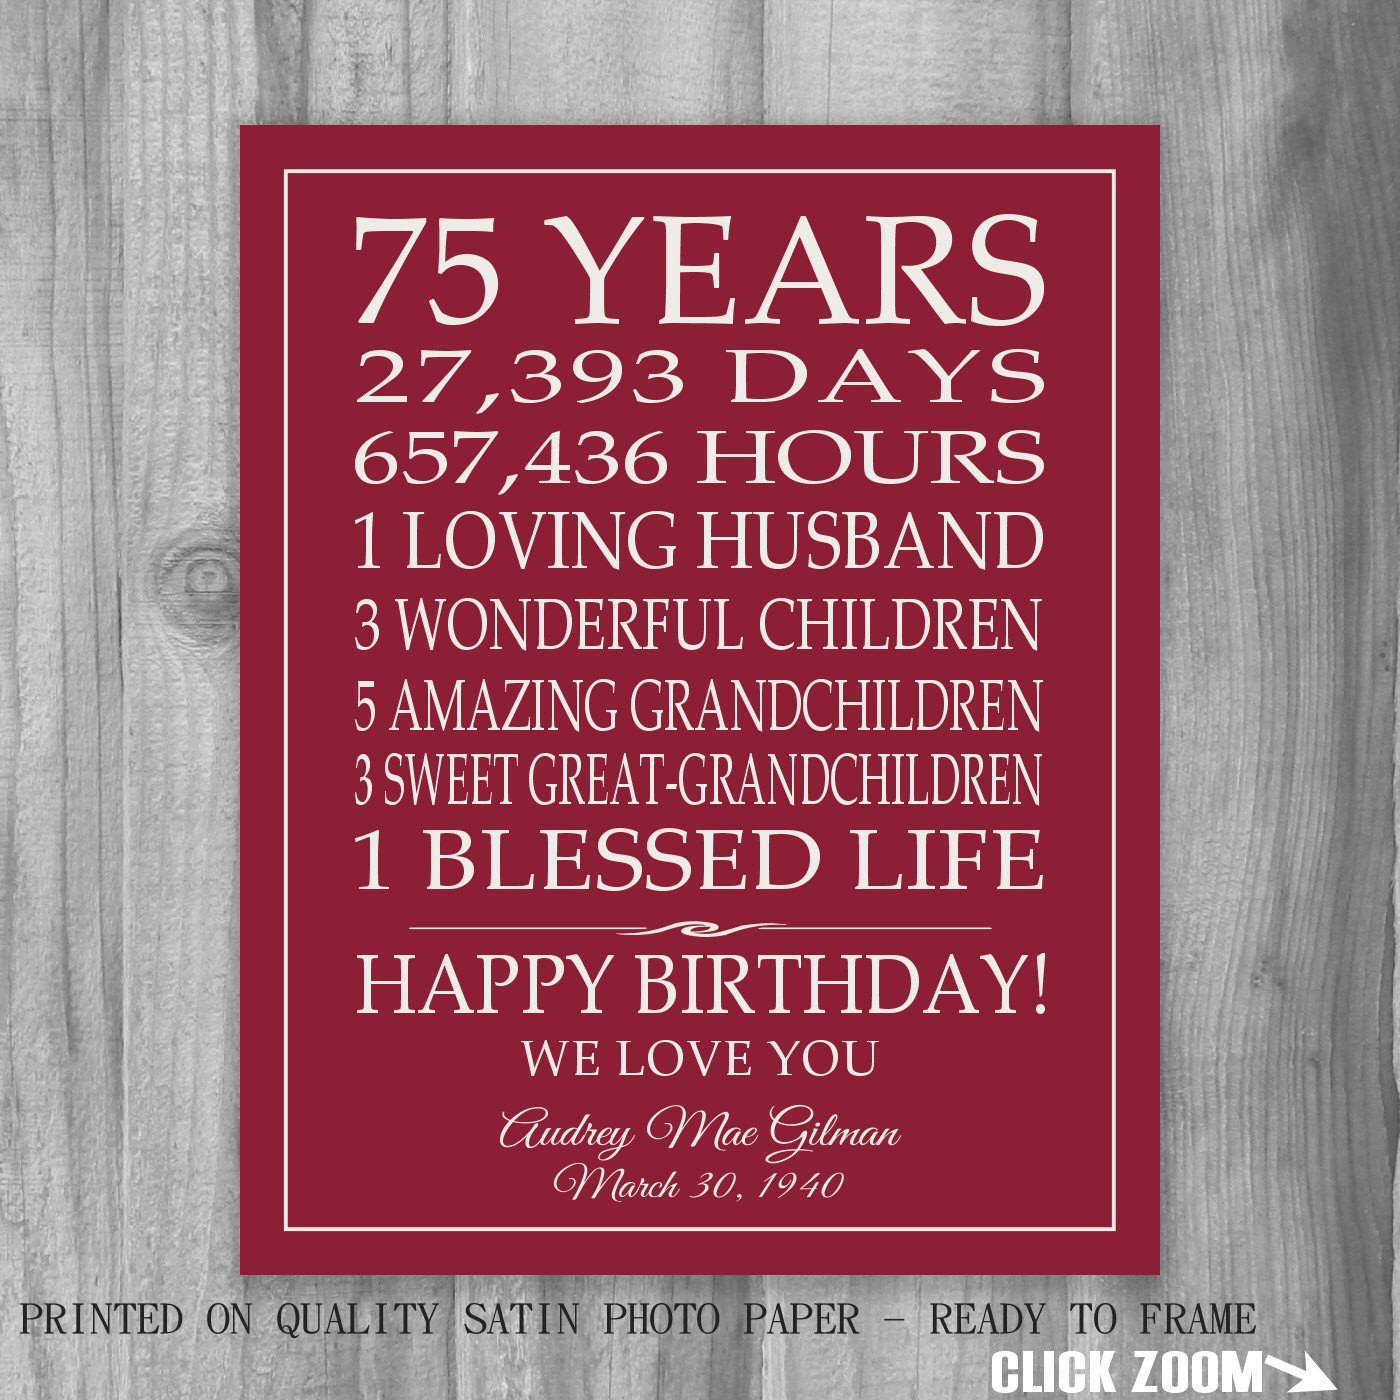 20 Ideas for 75th Birthday Gift Ideas for Mom – Home, Family, Style and